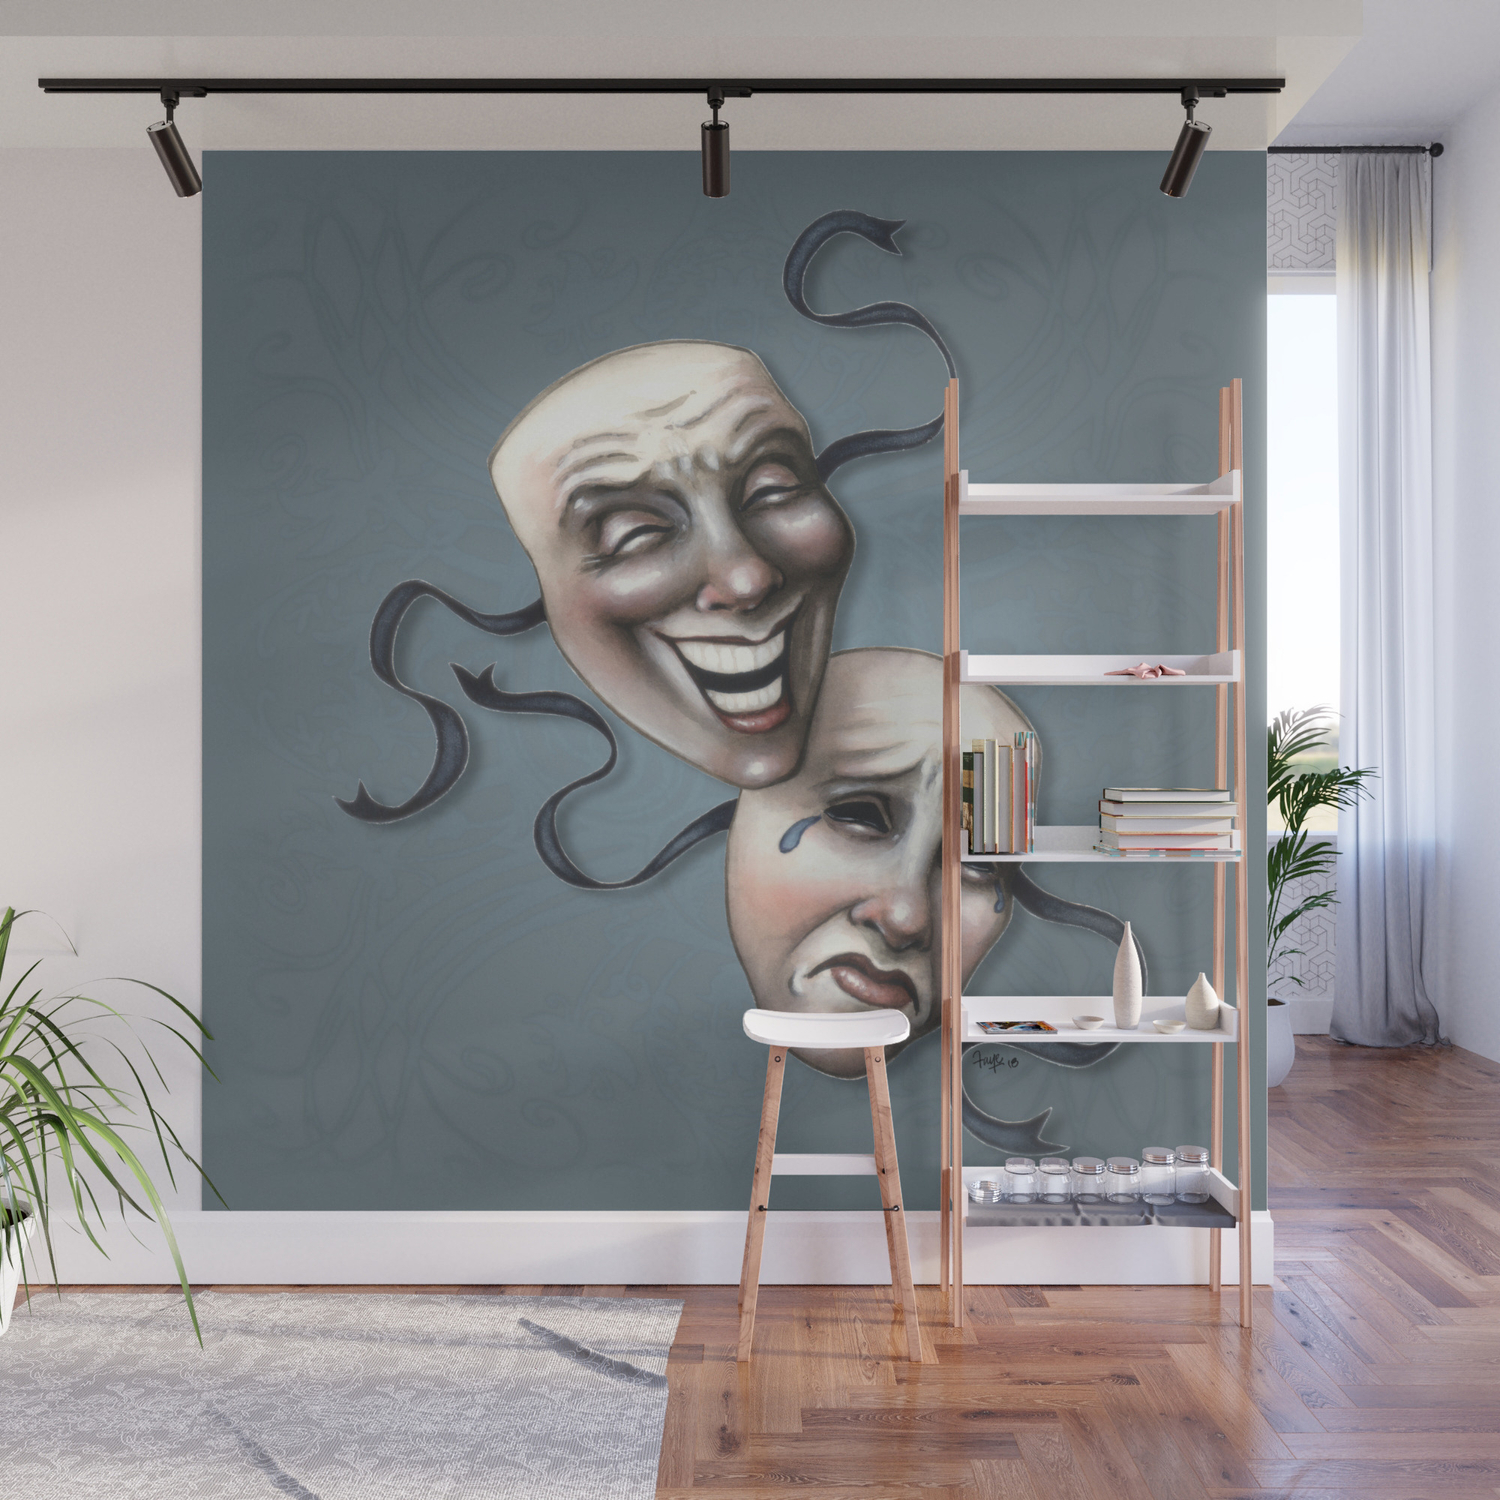 COMEDY TRAGEDY DRAMA MASKS ACTING WALL DECOR DECAL Many Sizes Available 